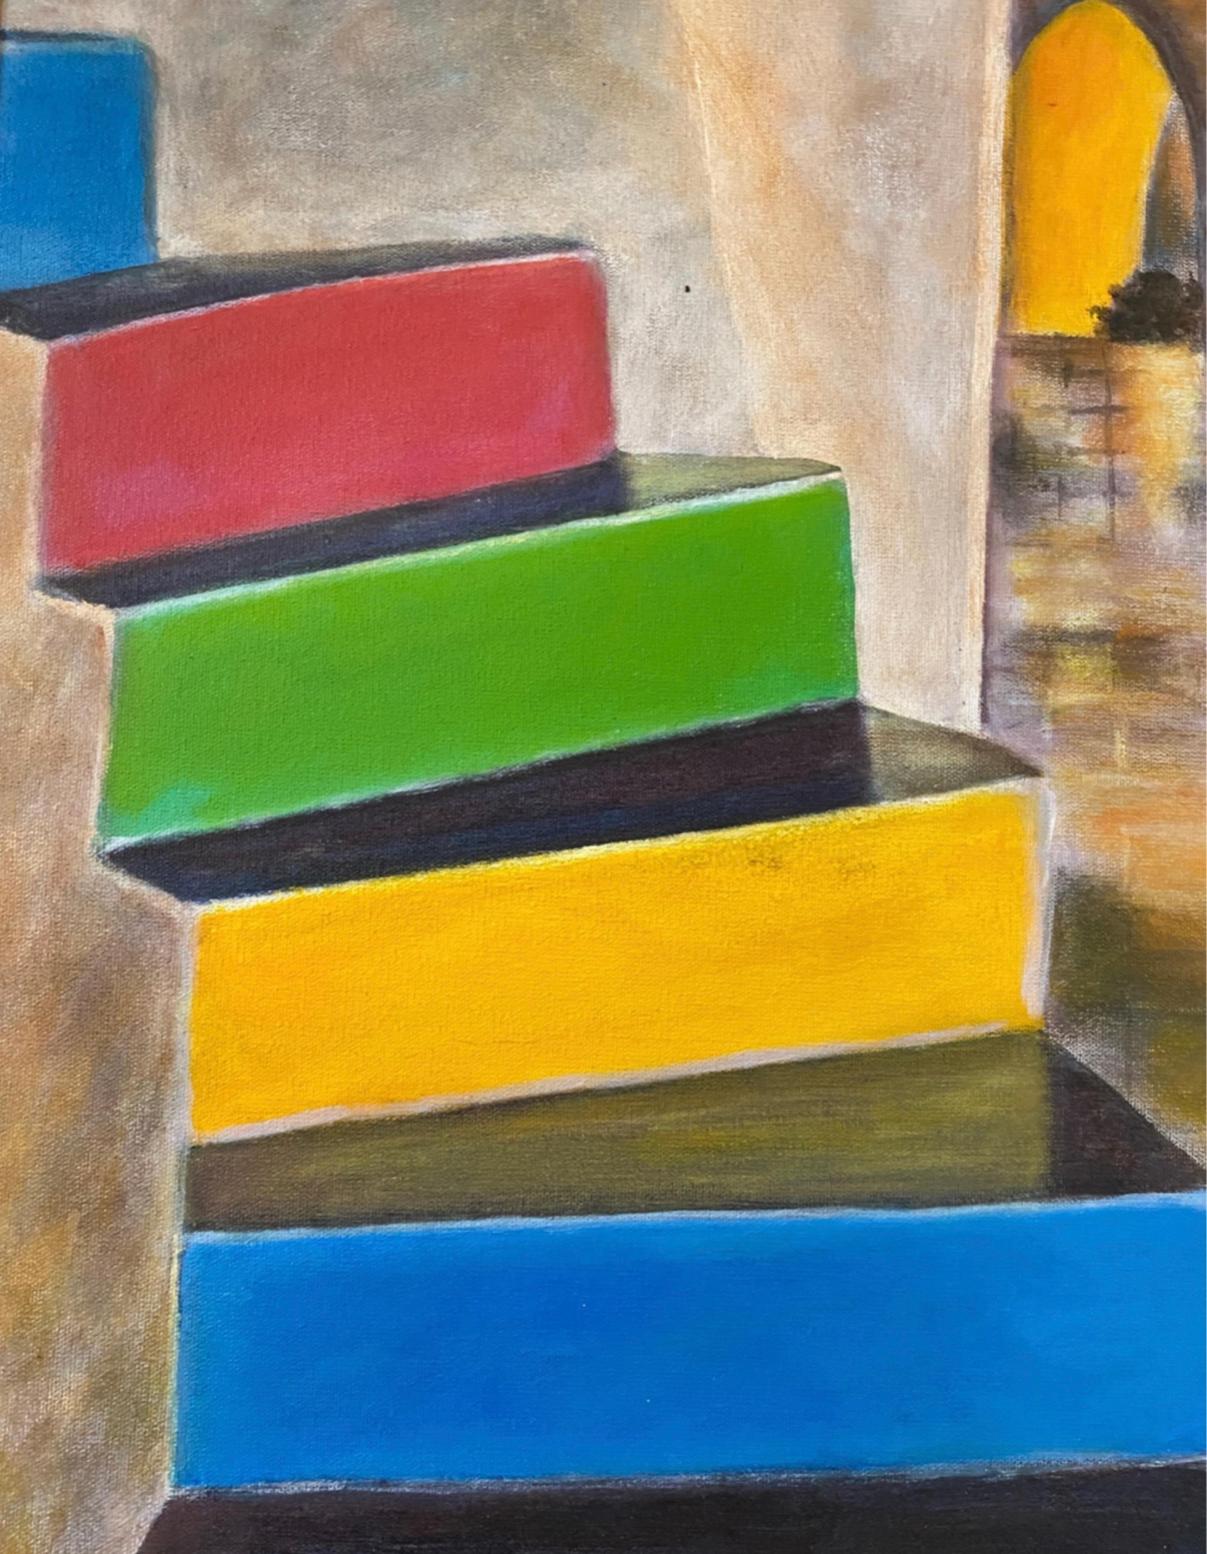 Vibrant rendition of the unique stairwell of the iconic Hotel Cala di Volpe. The stairwell is a famous element of the hotel, designed by architect Jacques Couëlle on the Costa Smereda of Sardegna, Italy. Oil on canvas. In brass frame and ready to